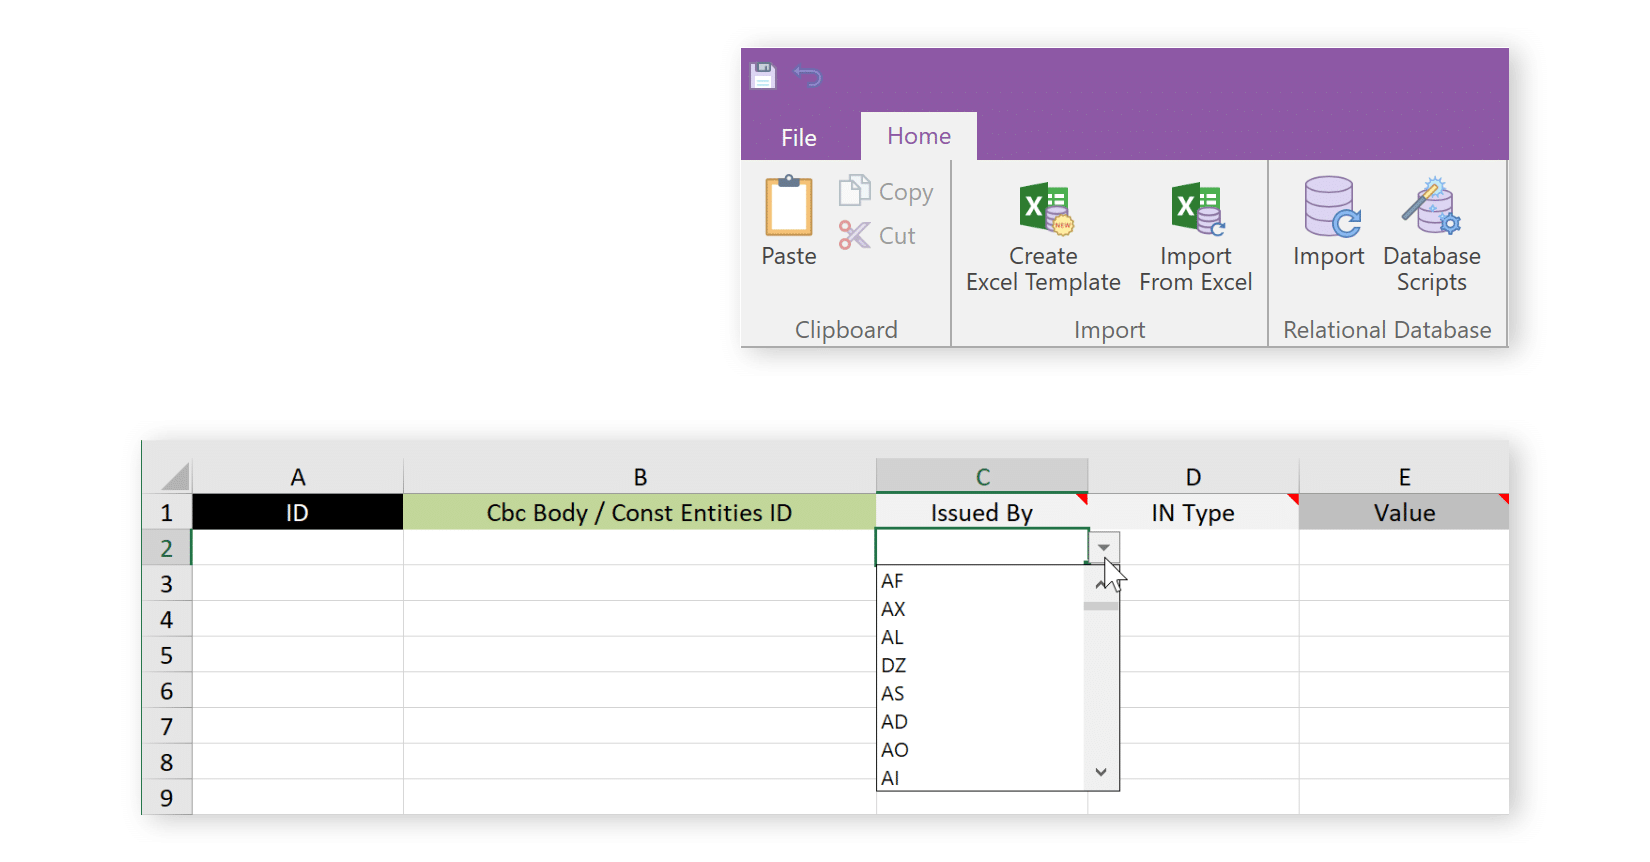 Integrate to Data in Excel or Relational Database